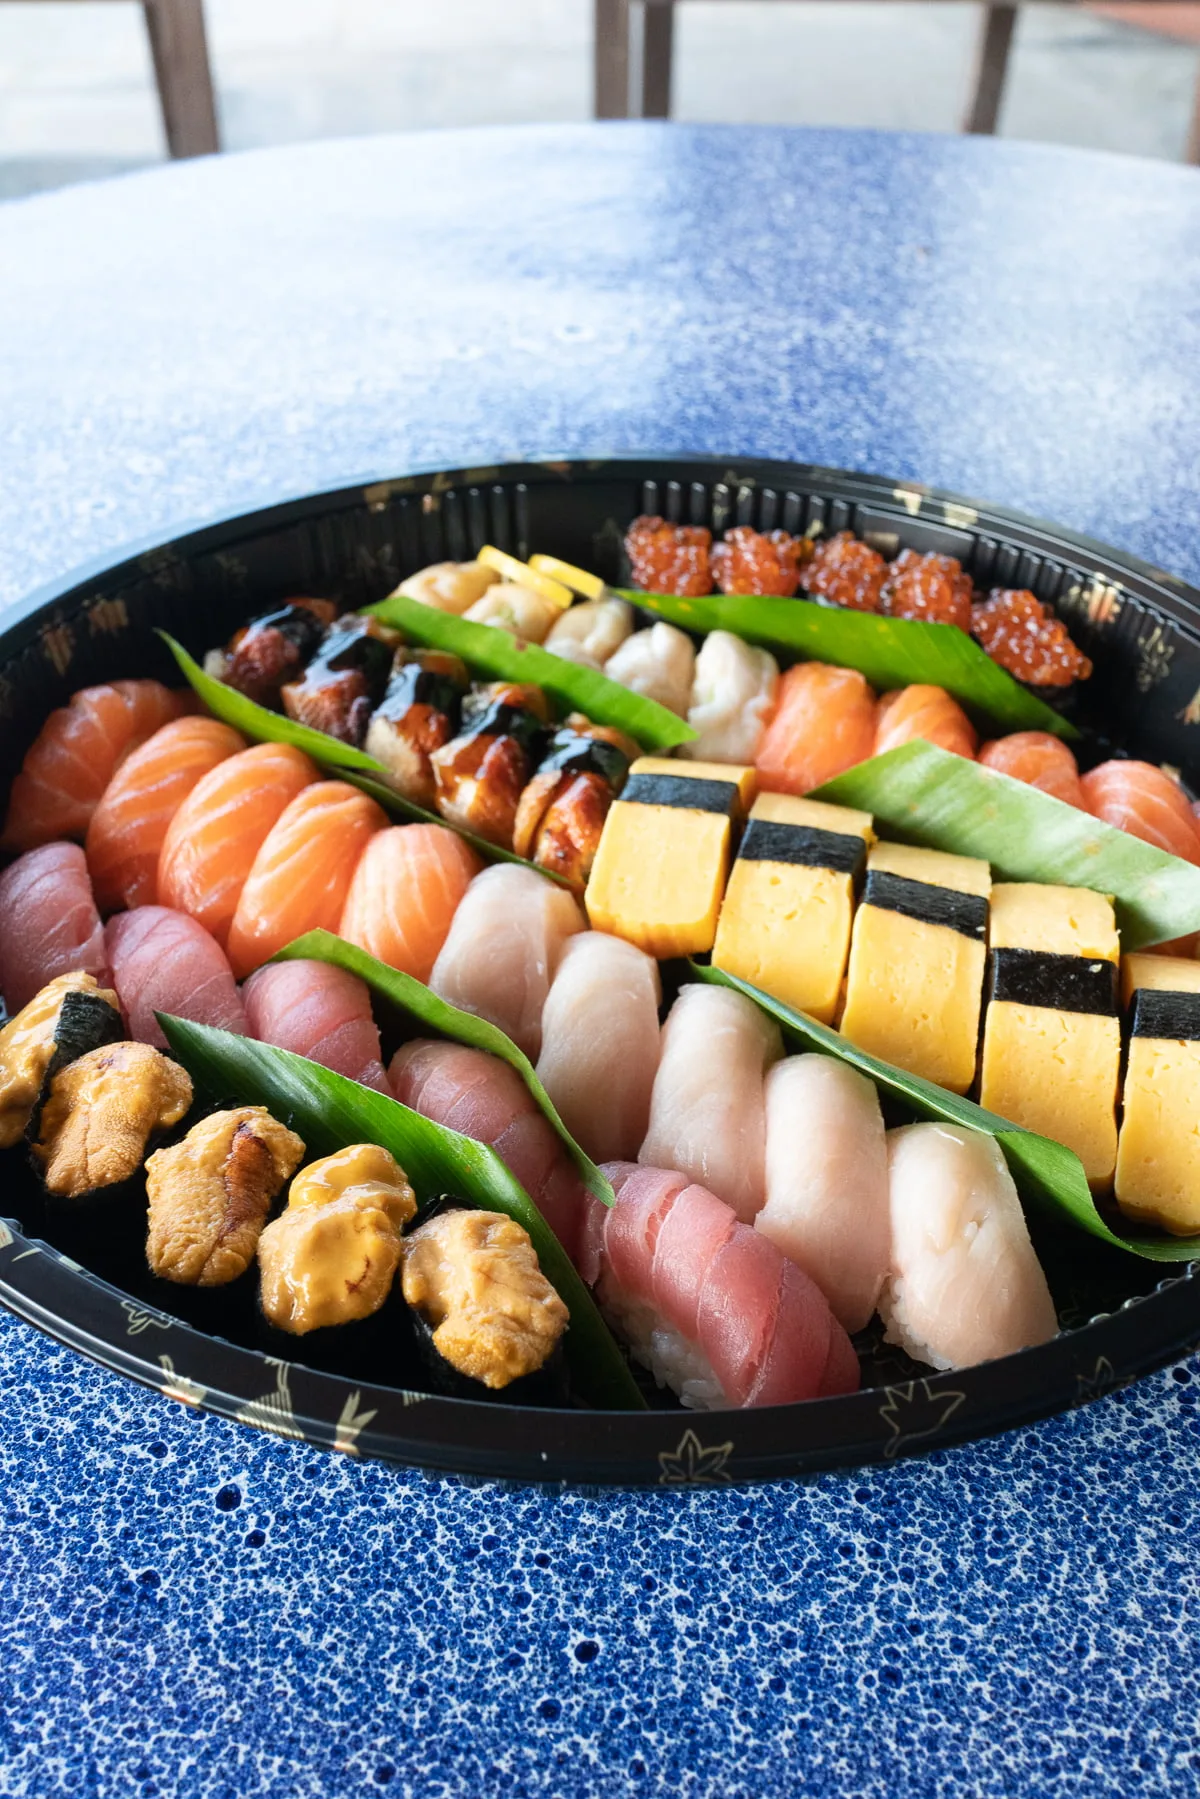 A sushi platter from Fish & Rice.